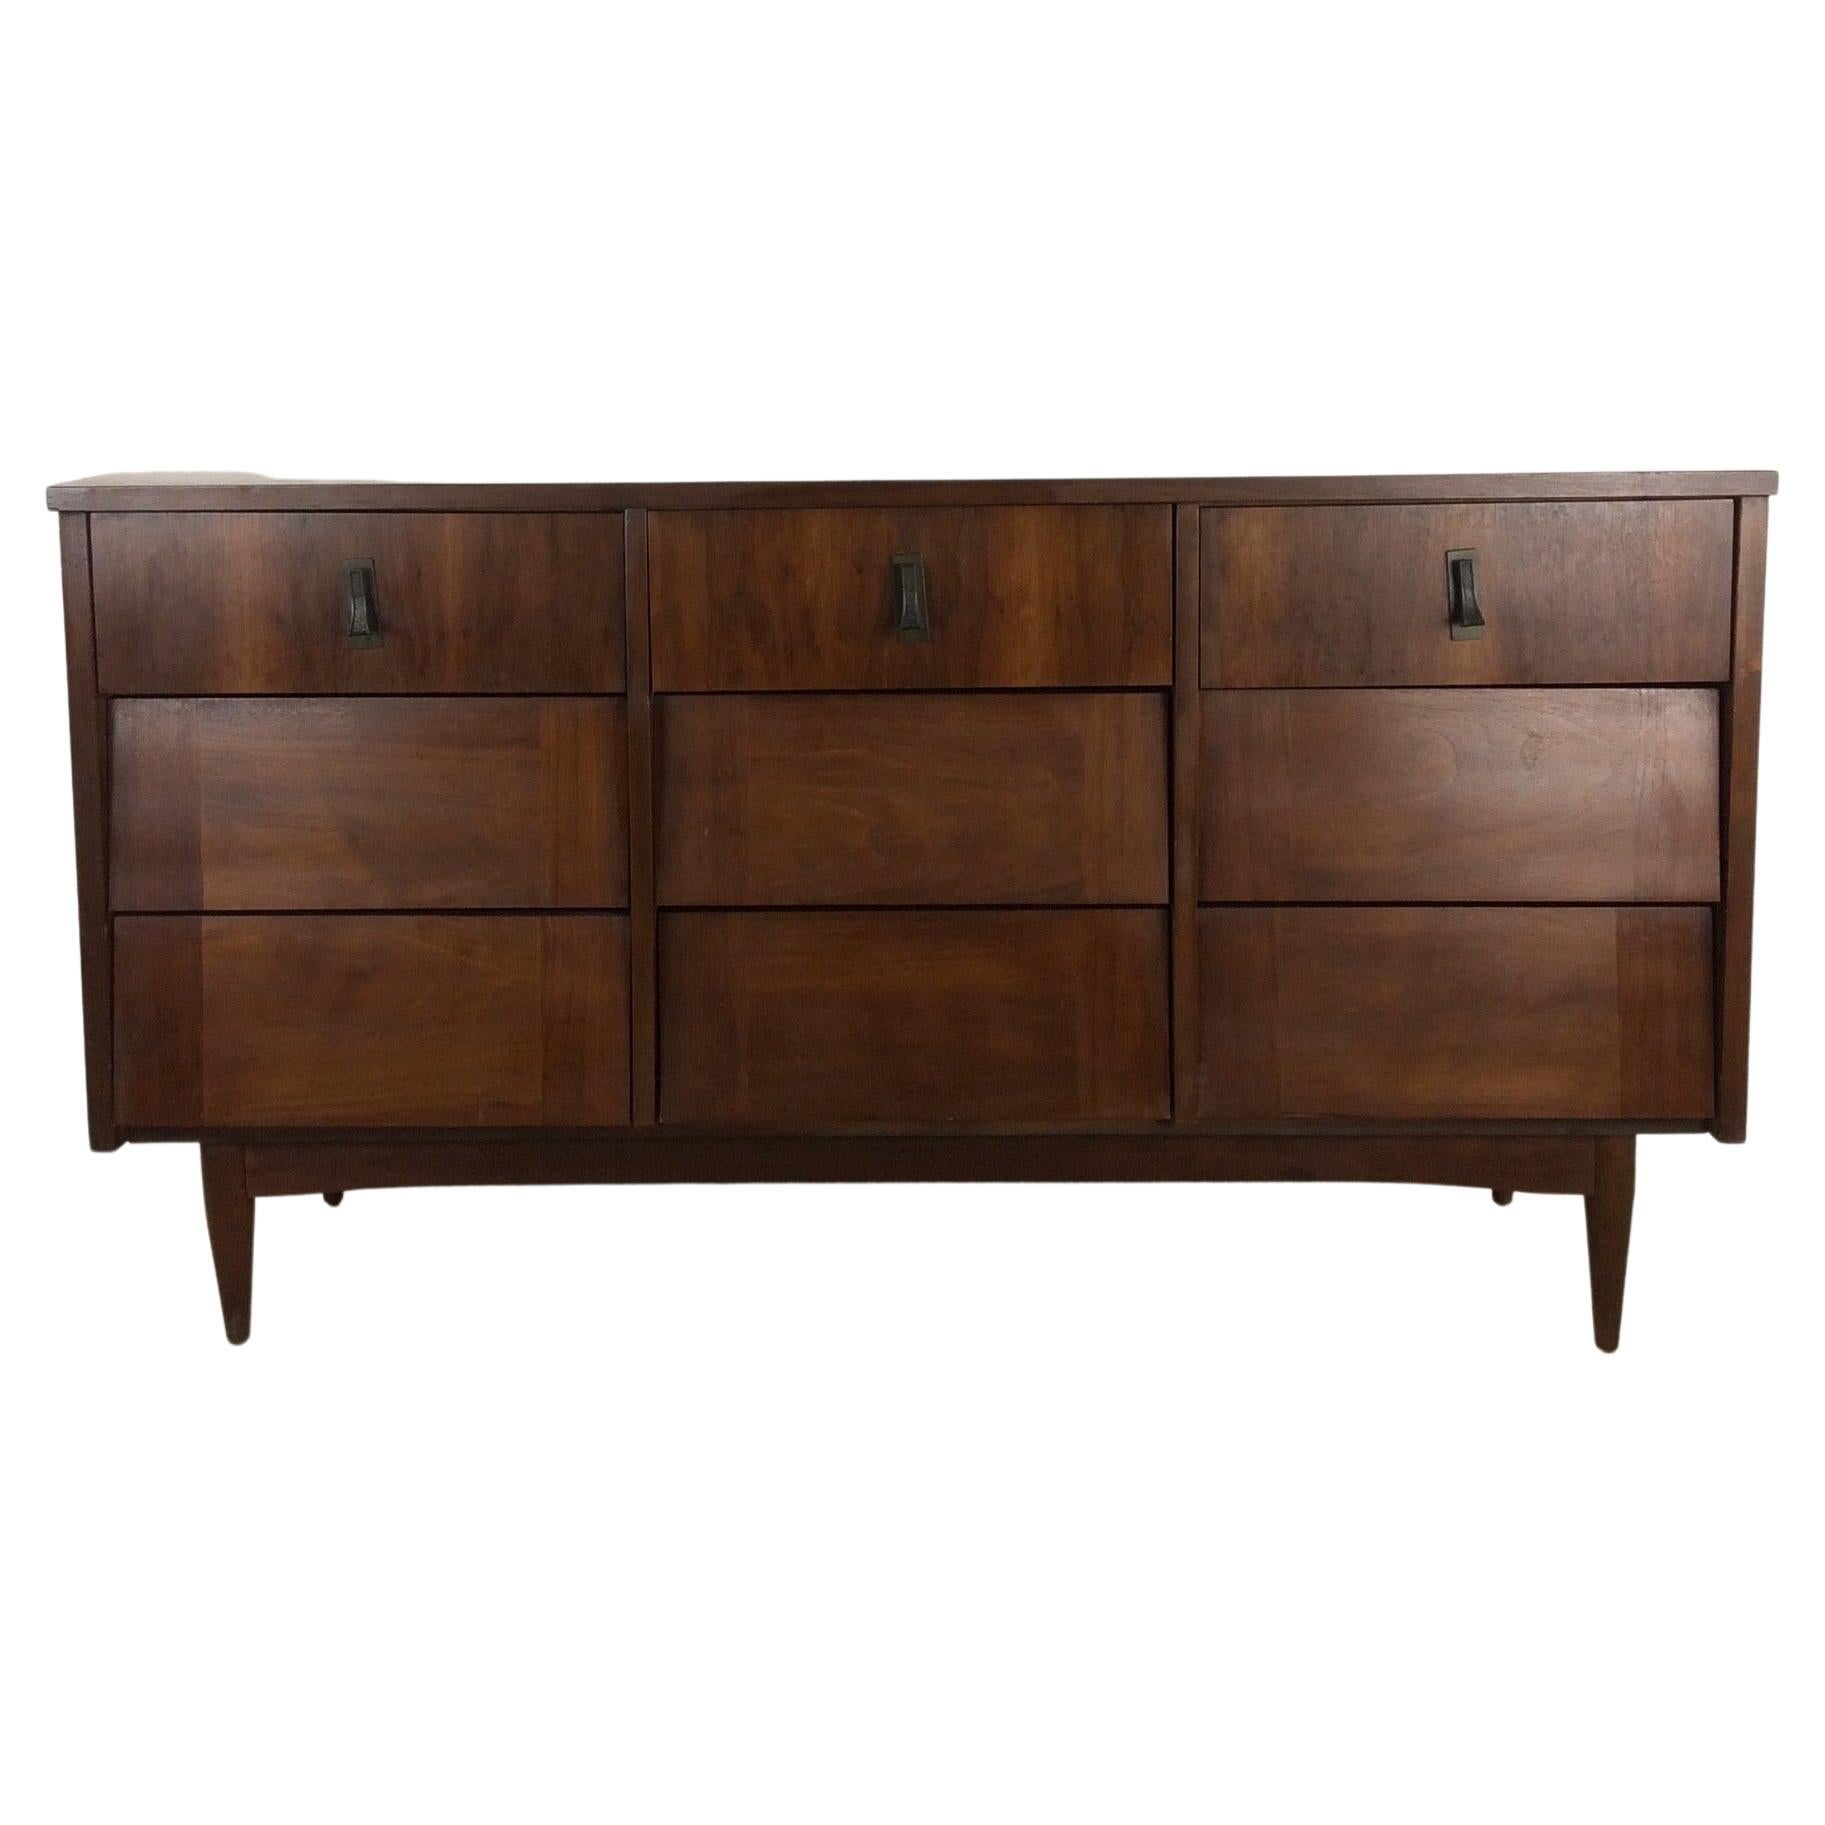 Mid-Century Modern Lowboy Dresser with 9 Drawers and Brass Hardware